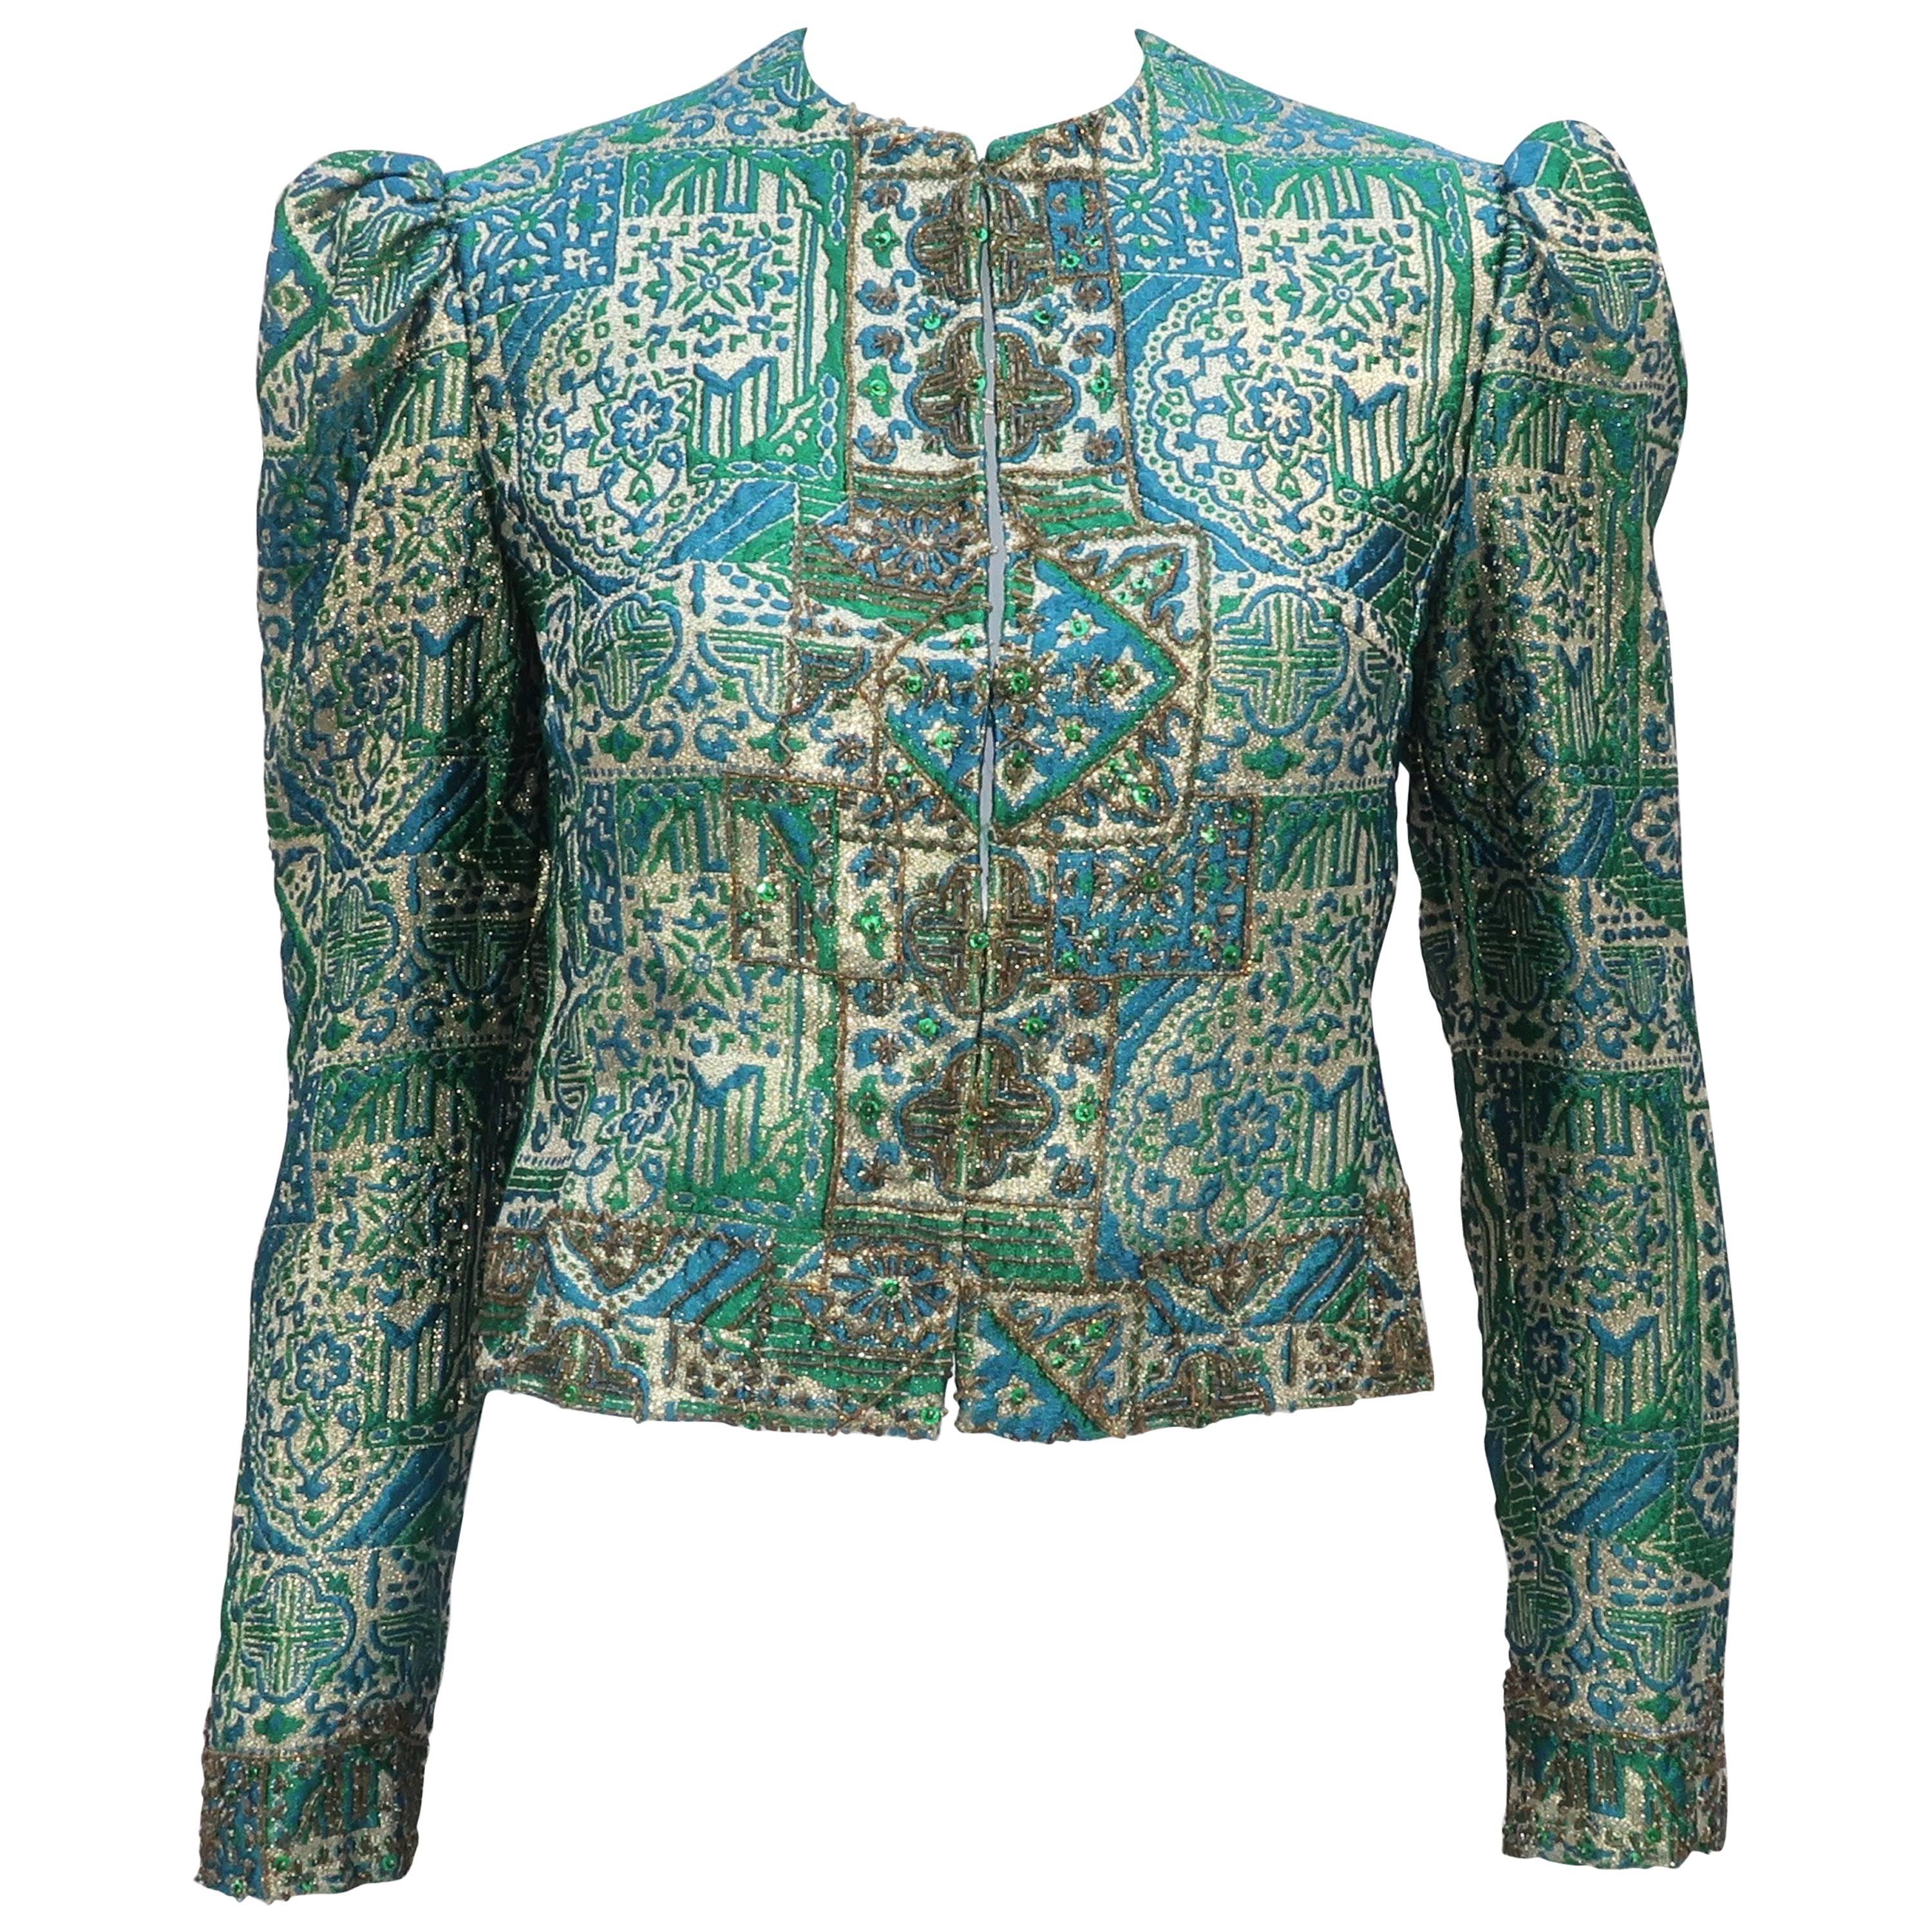 Regal 1960's Victoria Royal Fitted Brocade Jacket with Beading